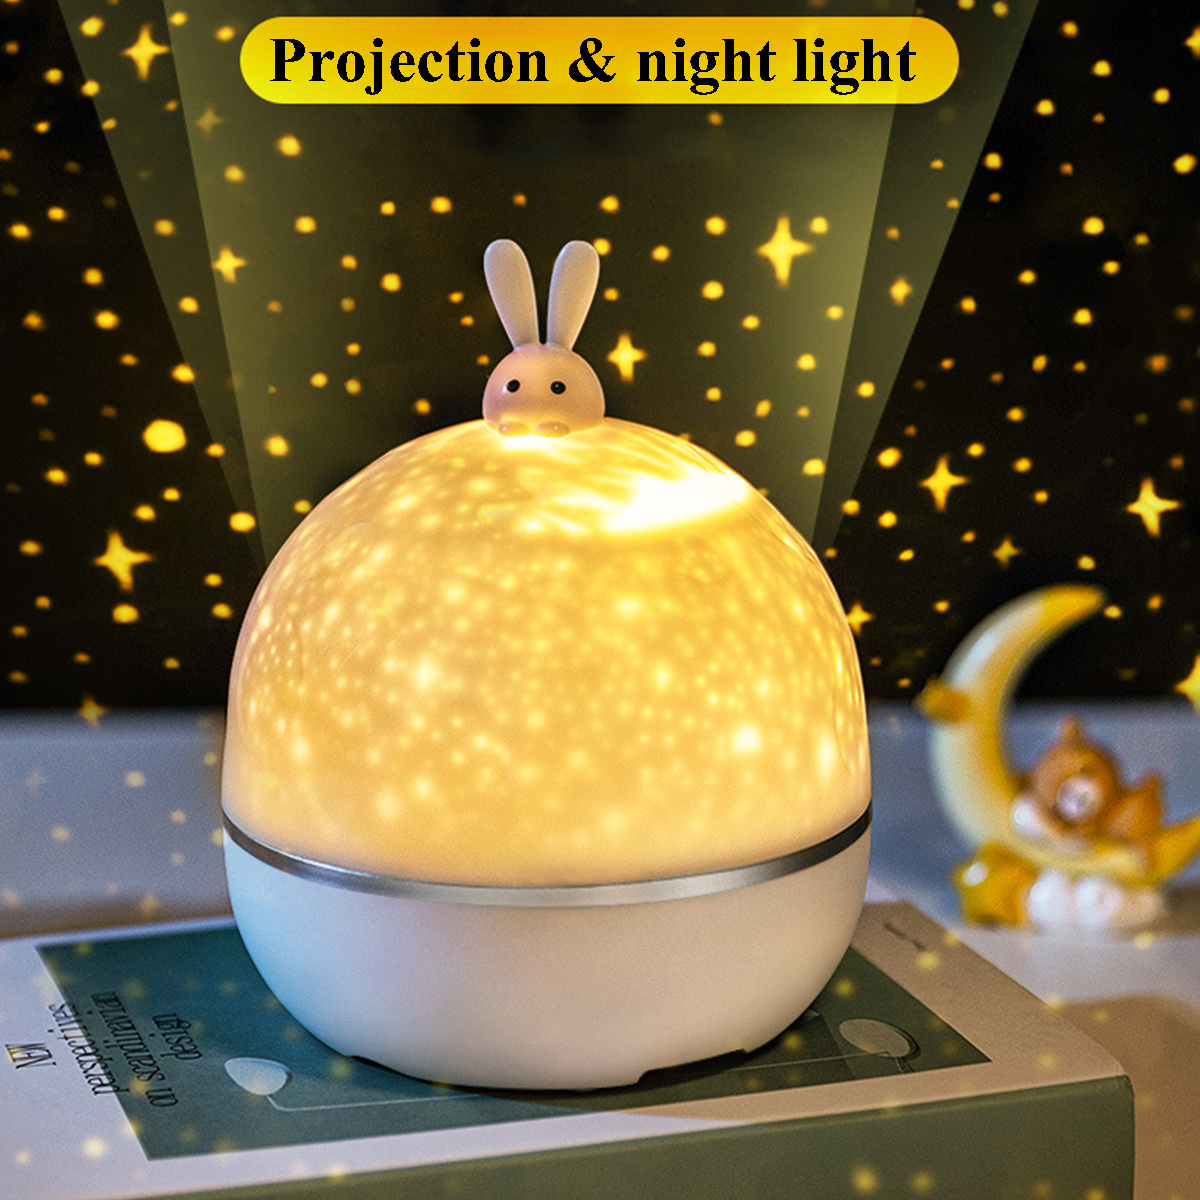 Starry-Sky-Projection-Lamp-3-Color-Ligth-Rotation-Bedroom-Night-Light-Best-Gift-1935373-1